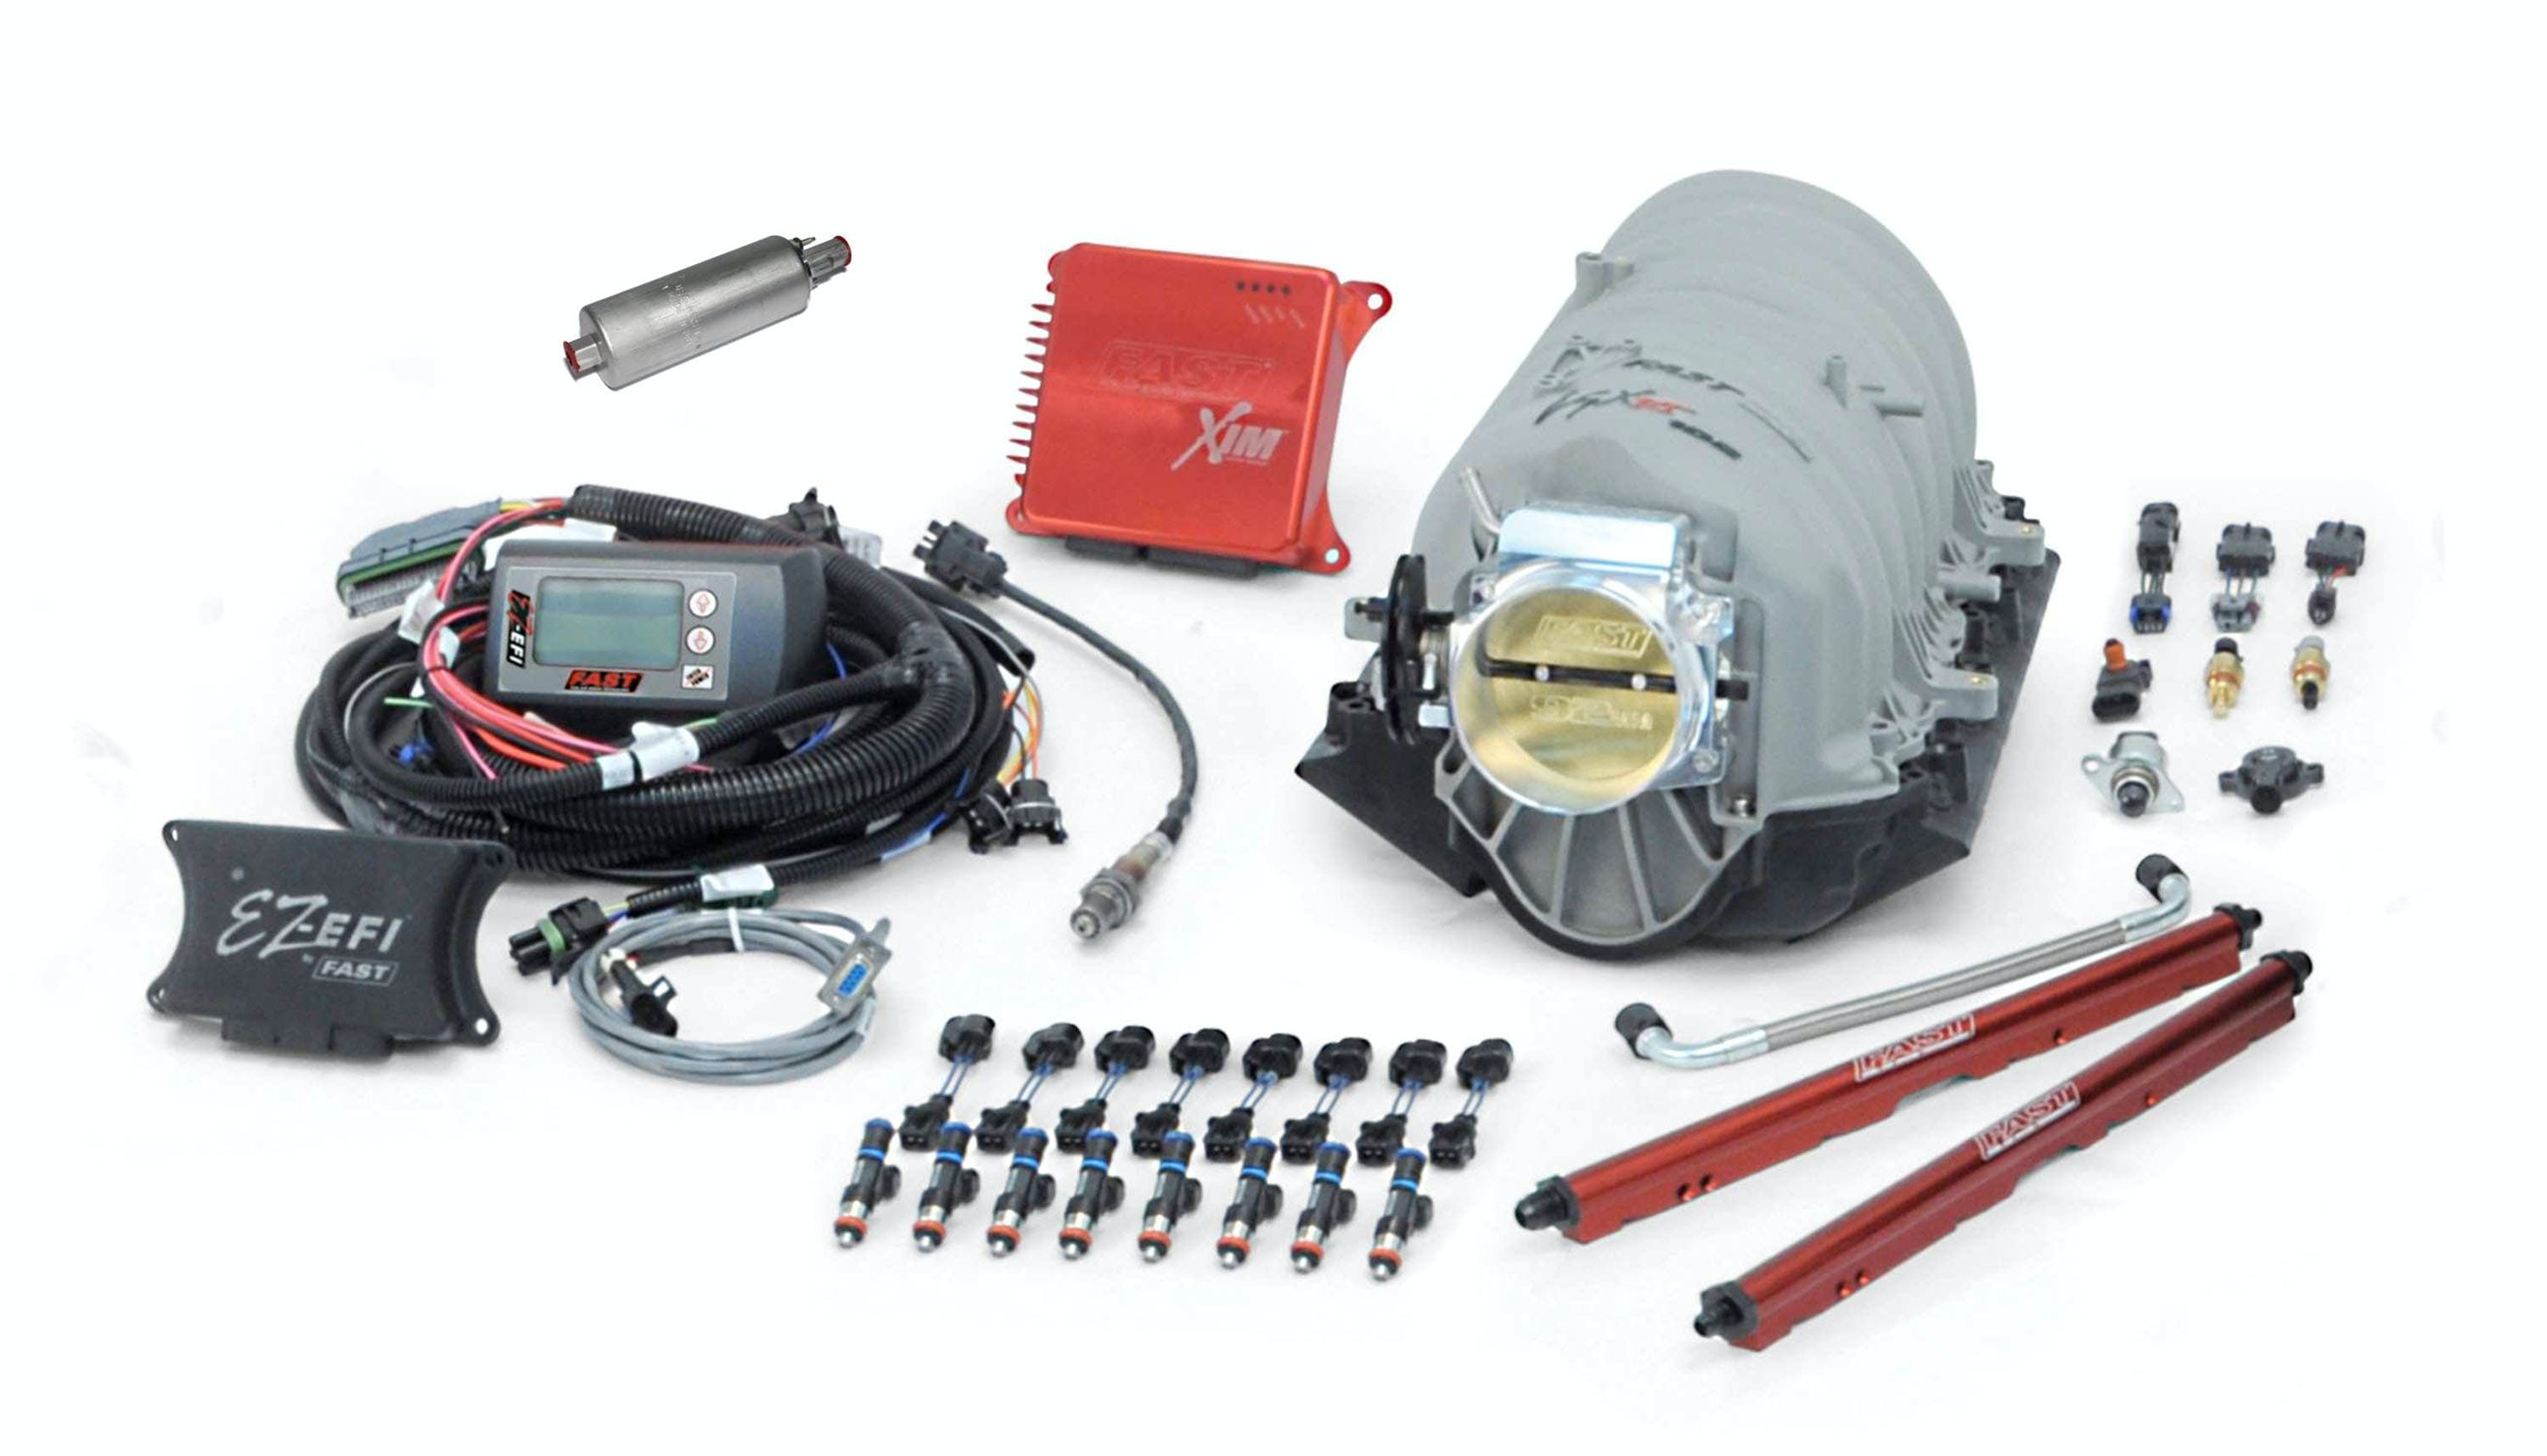 FAST - Fuel Air Spark Technology 302003T LS EZ EFI with XIM, In-Tank Fuel Pump and Truck Manifold